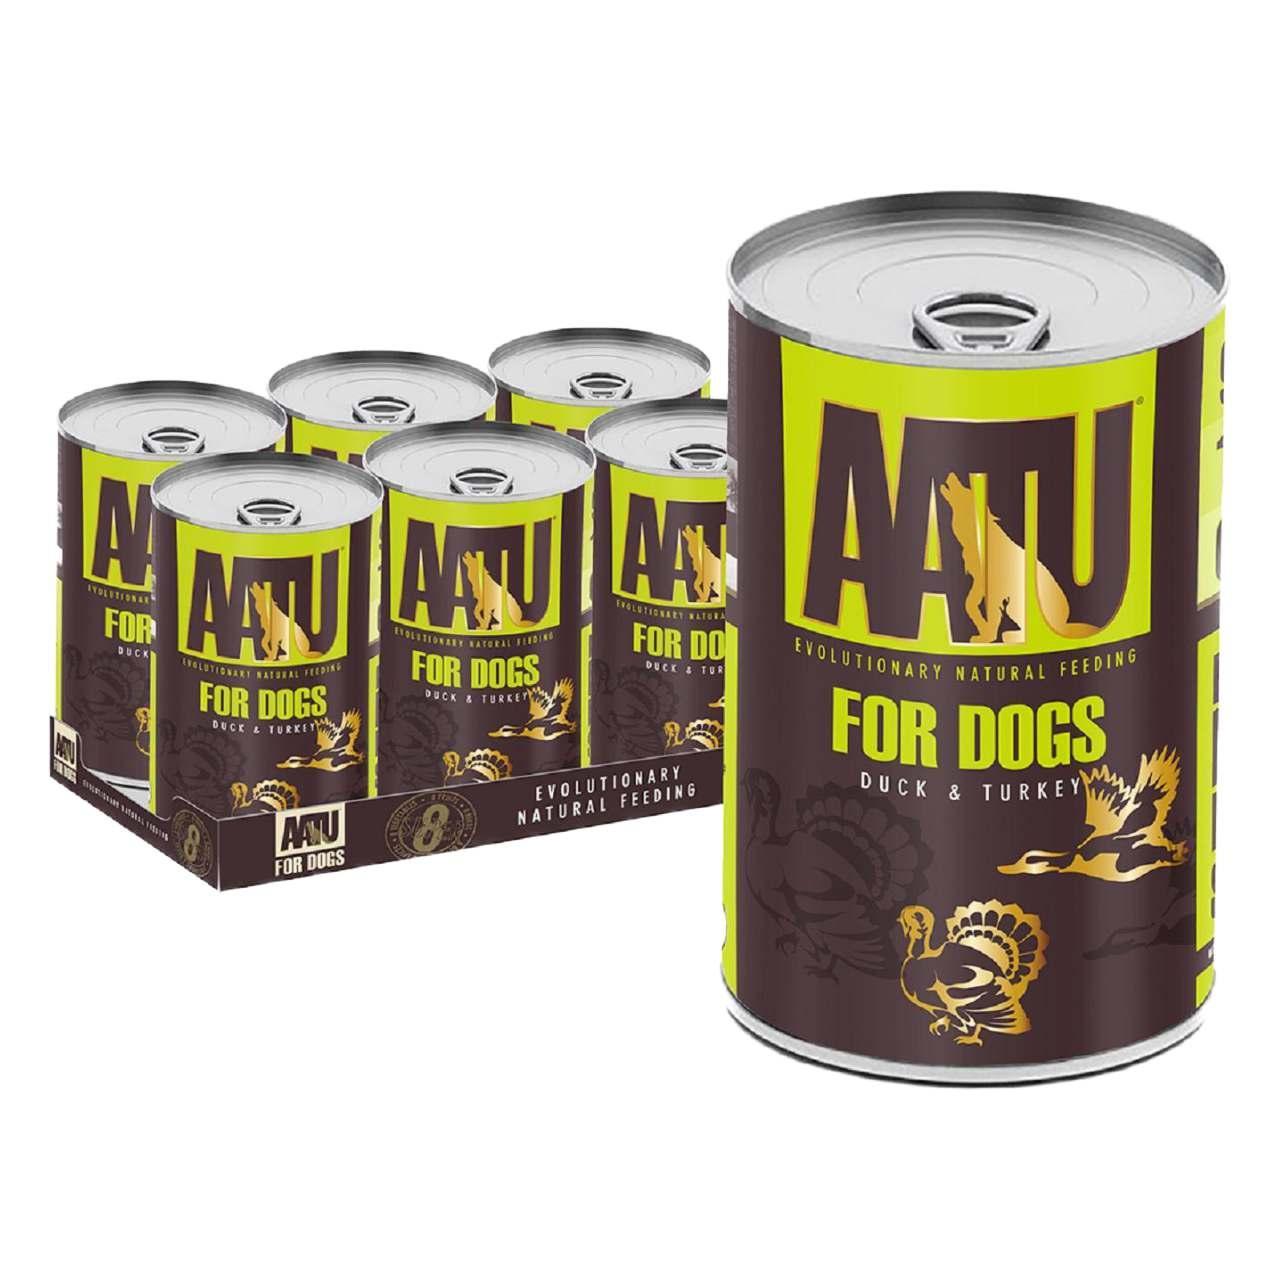 An image of AATU For Dogs Duck & Turkey Tins